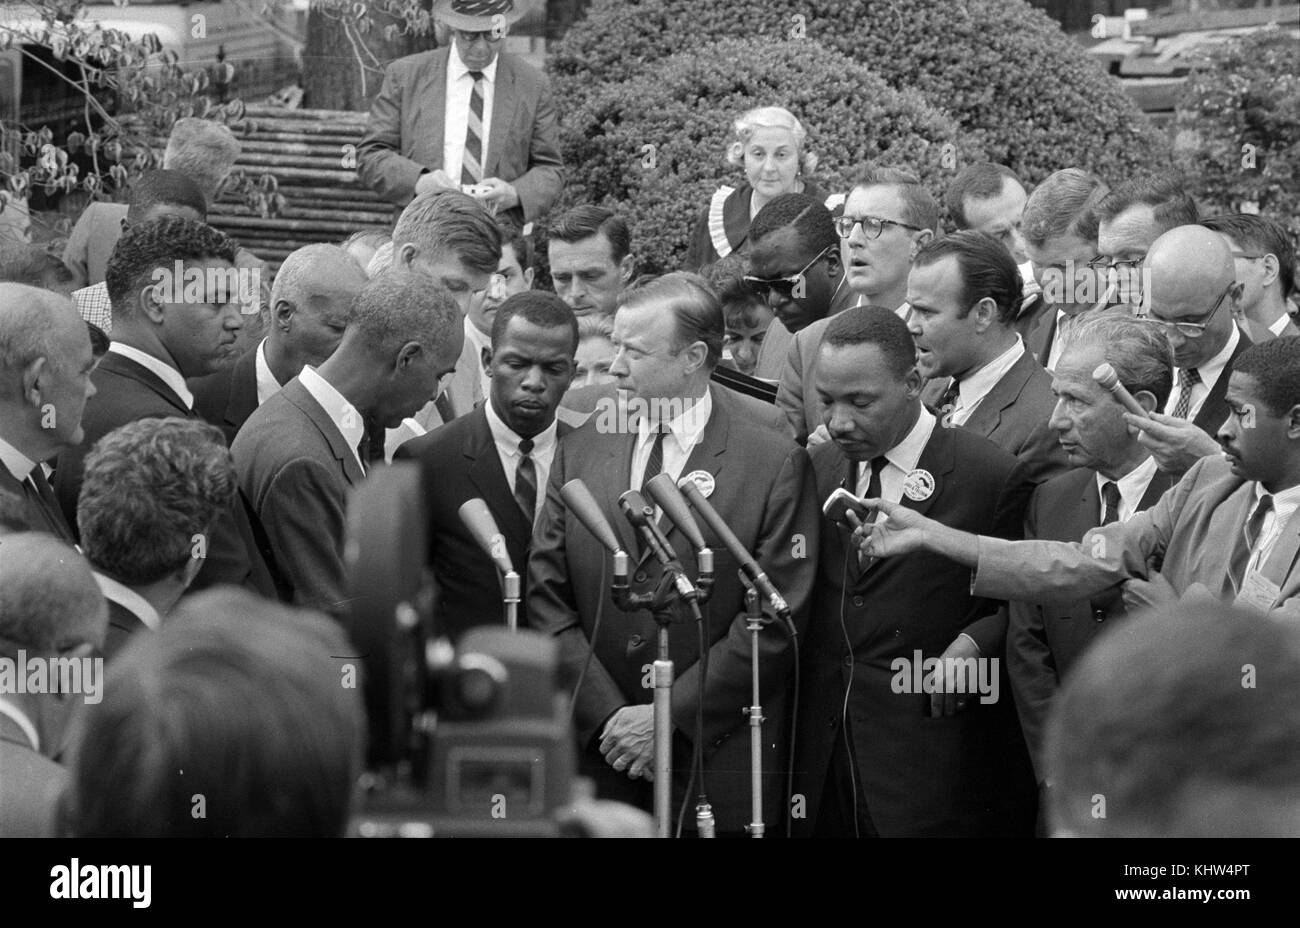 Photograph of Civil Rights leaders talking with reporters after meeting with President John F. Kennedy (1917-1963) after the March on Washington. Dated 20th Century Stock Photo